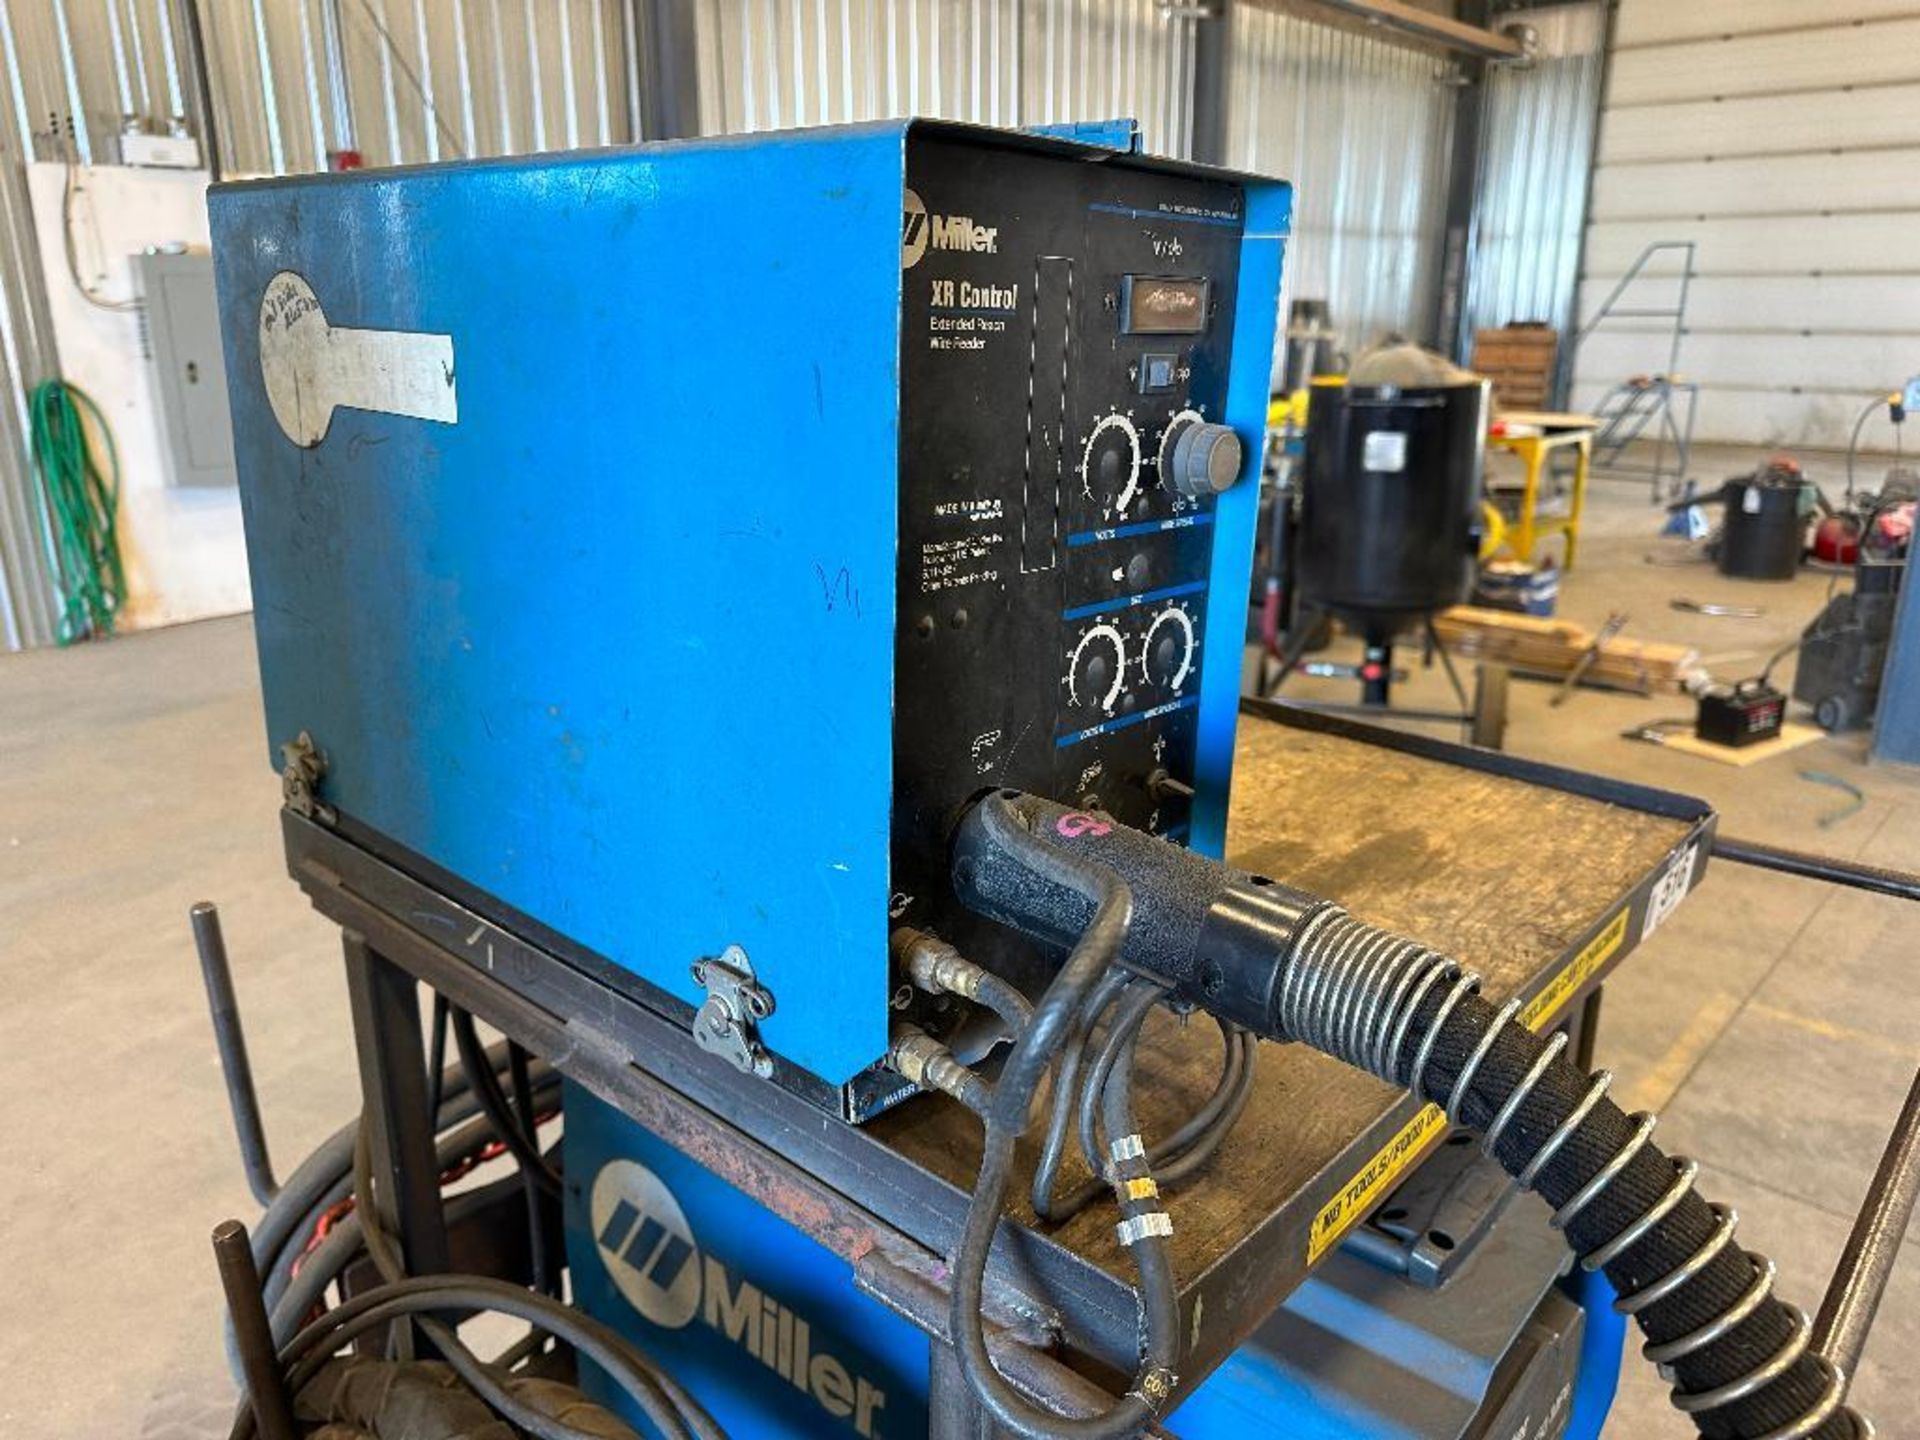 Lot of Miller Invision 450 MPa Welder, Miller XR Control Extended Reach Wire Feeder, Miller Pistol, - Image 8 of 13